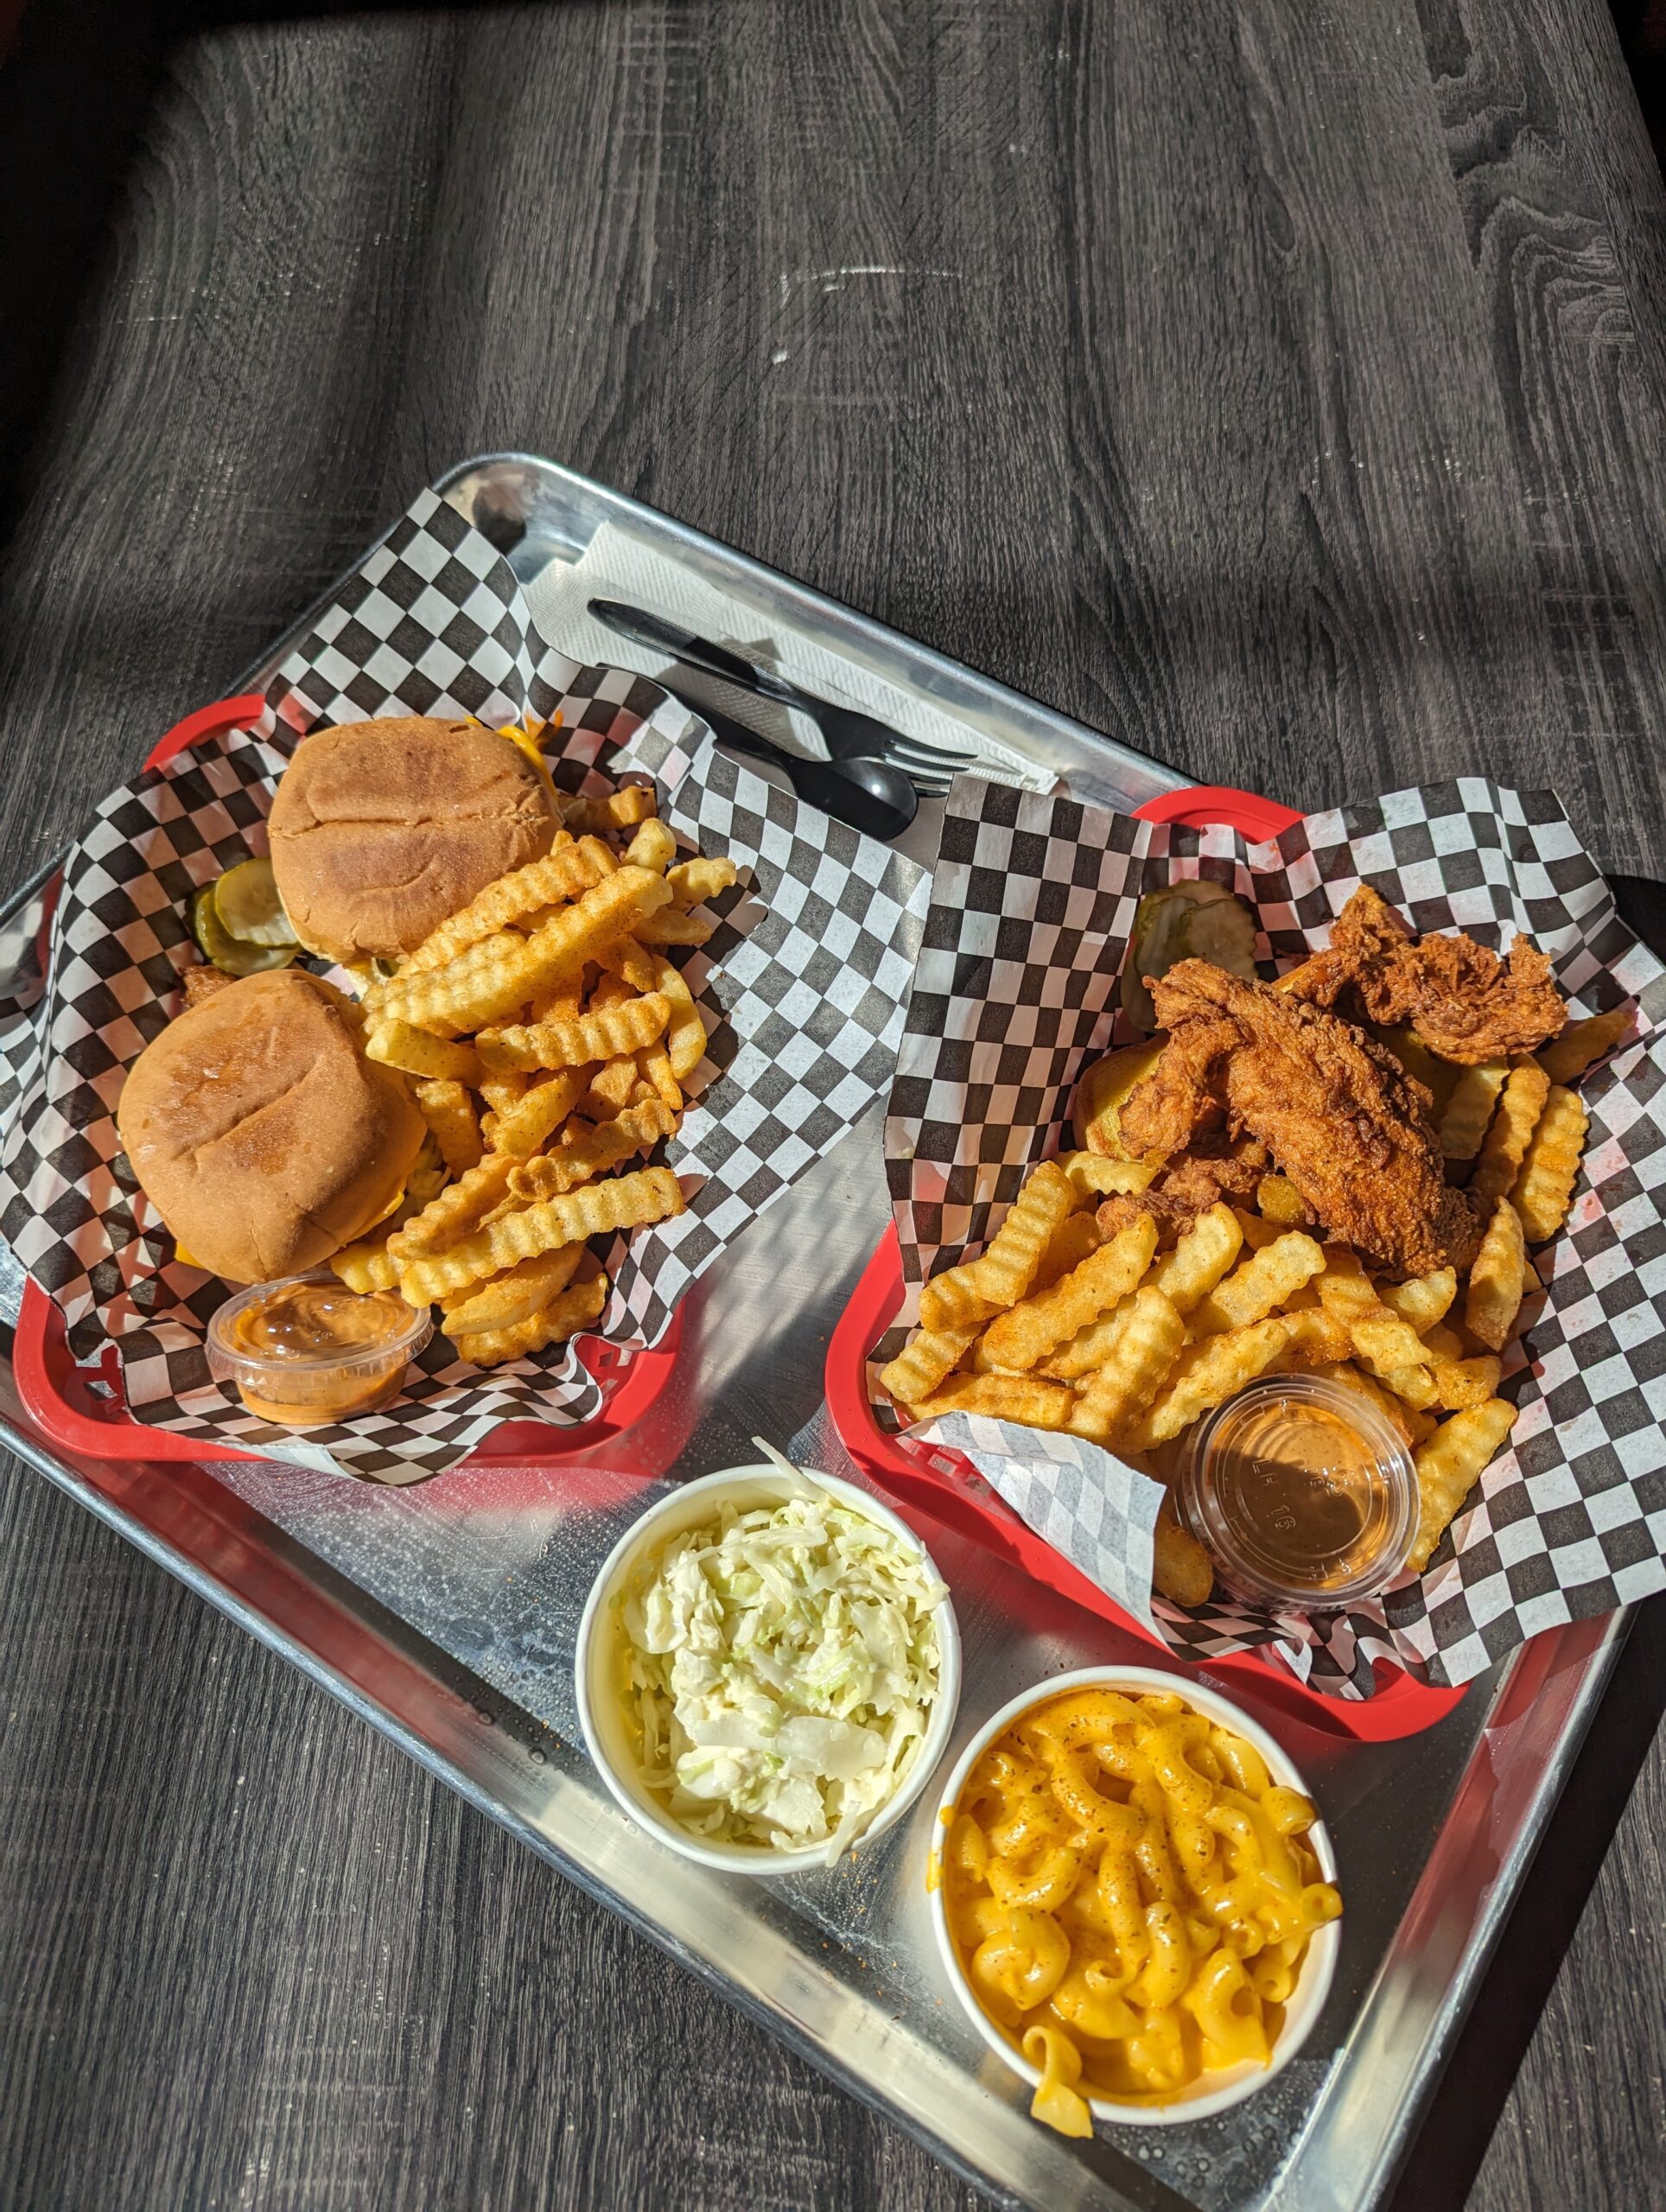 Chicken sandwich, chicken tenders, fries, and sides from Rambo's Hot Chicken in Simi Valley